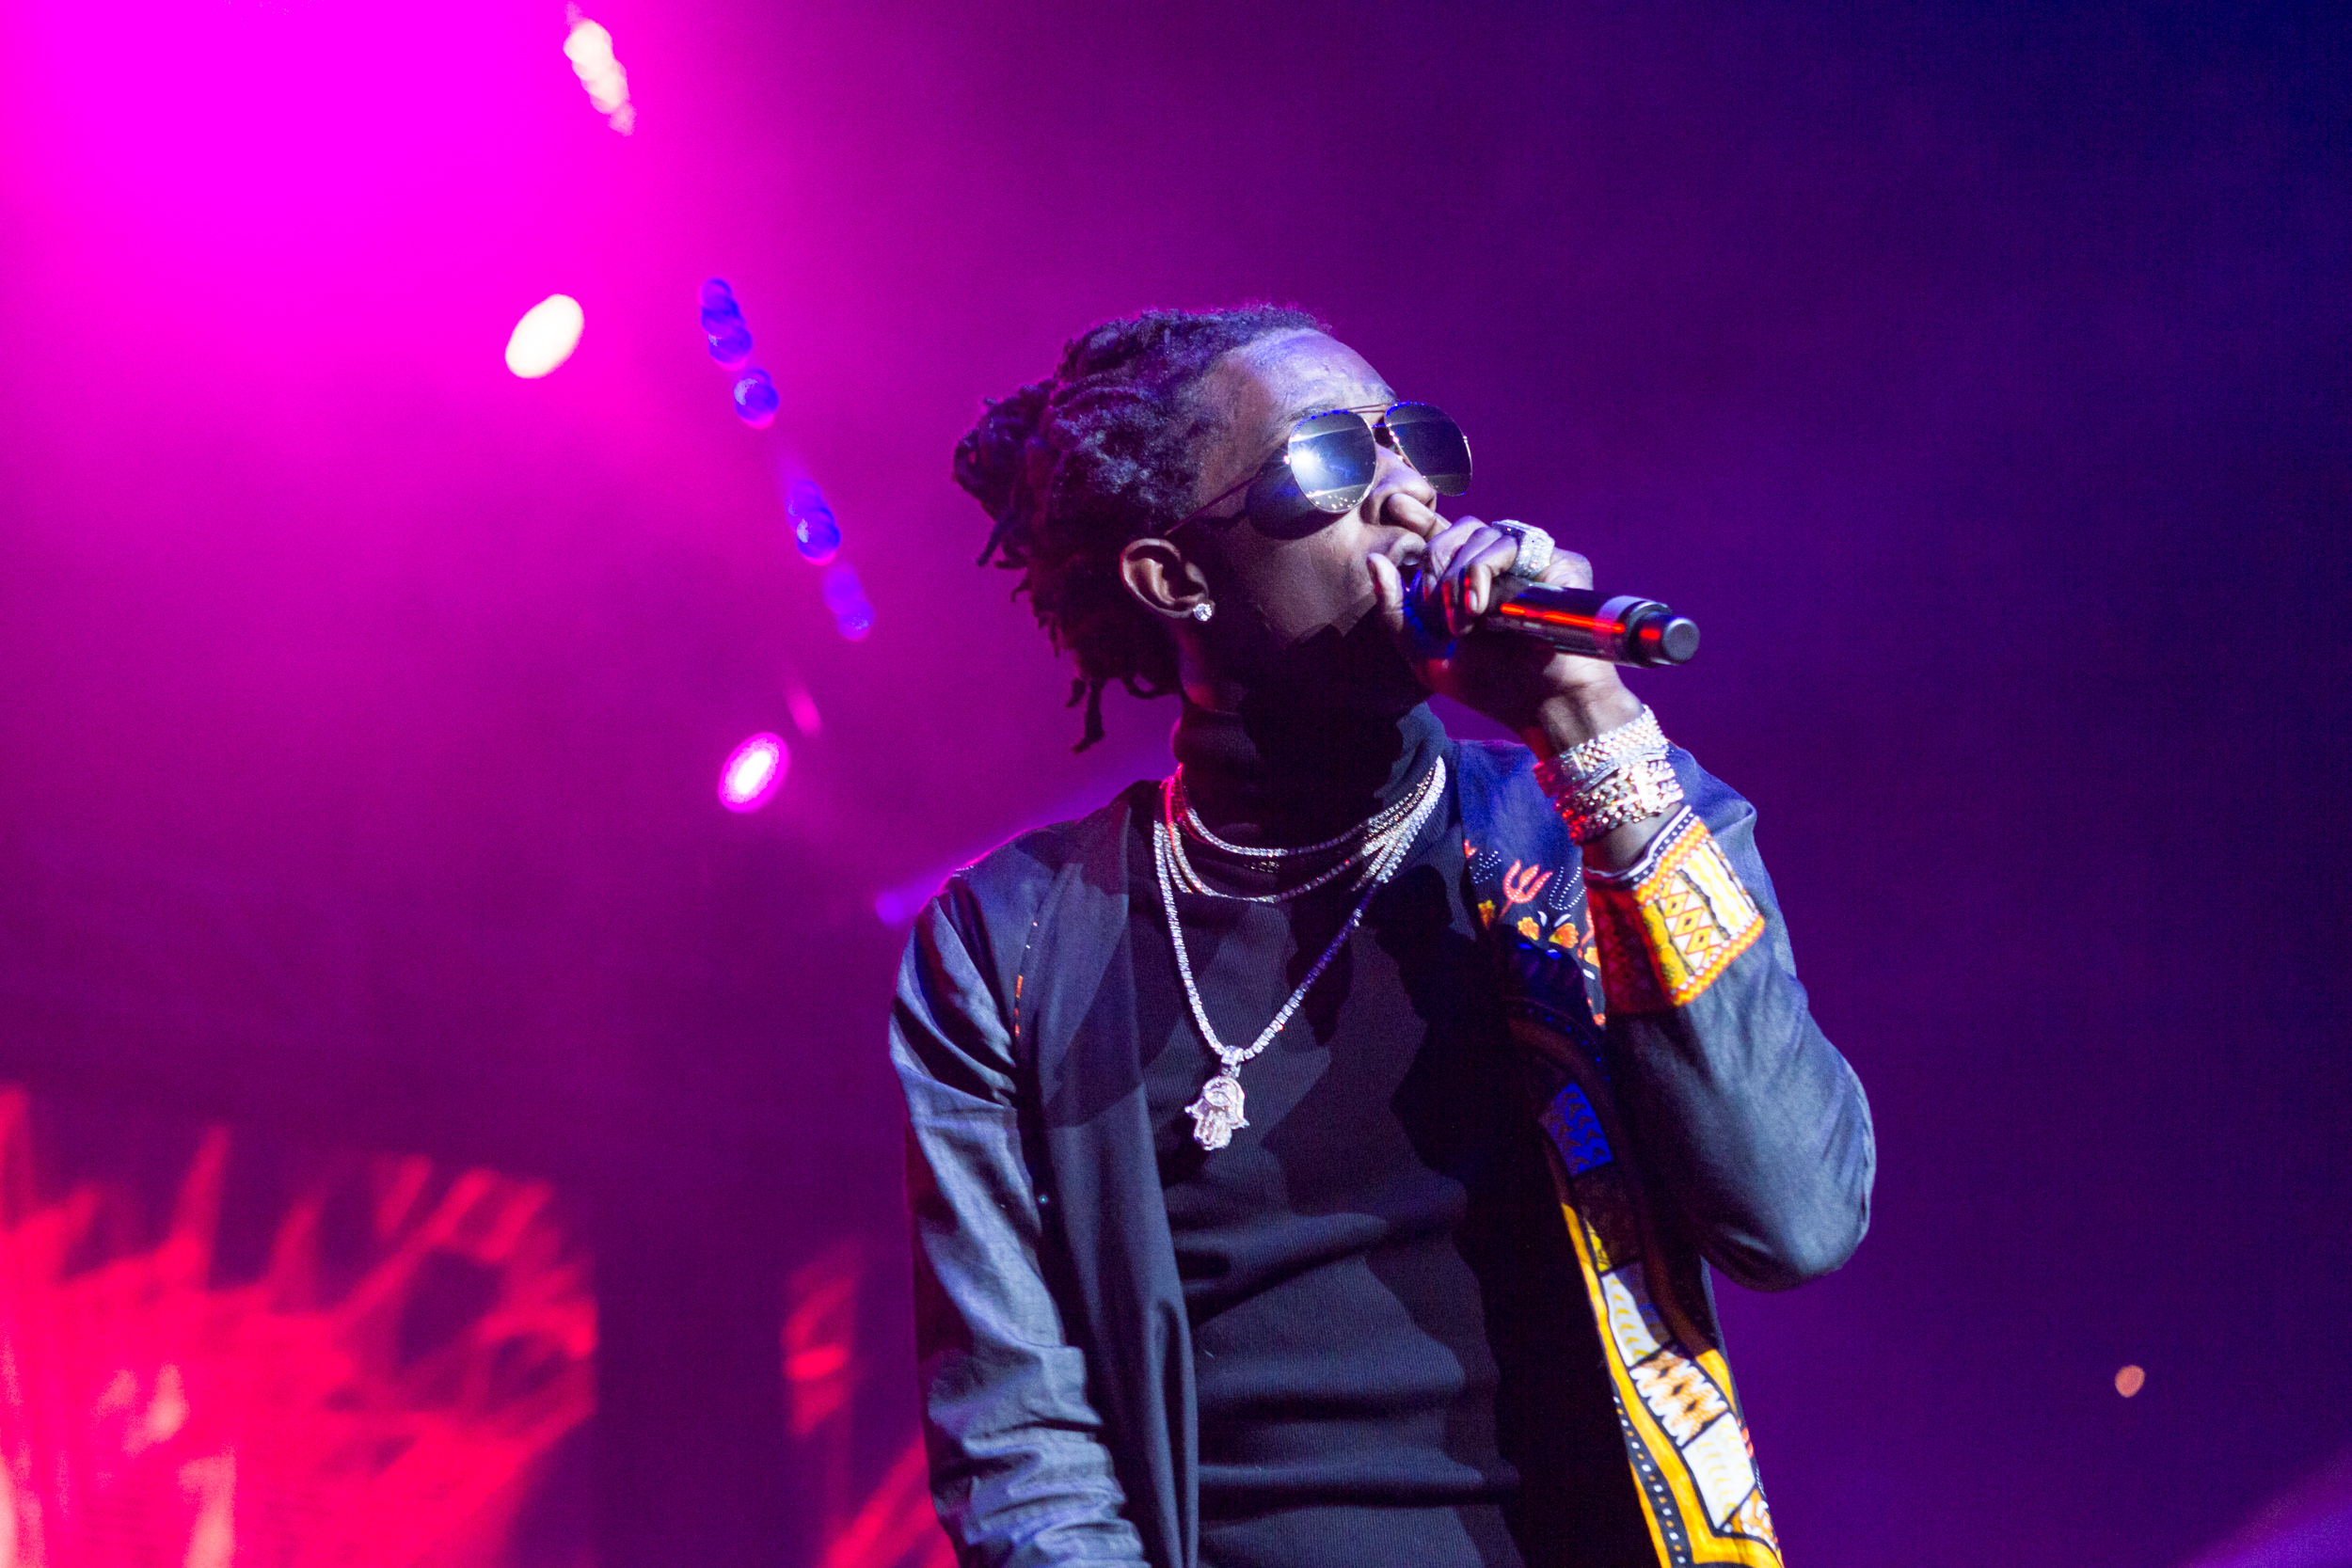 Atlanta Rap Star Young Thug Arrested On RICO, Gang-Related Charges